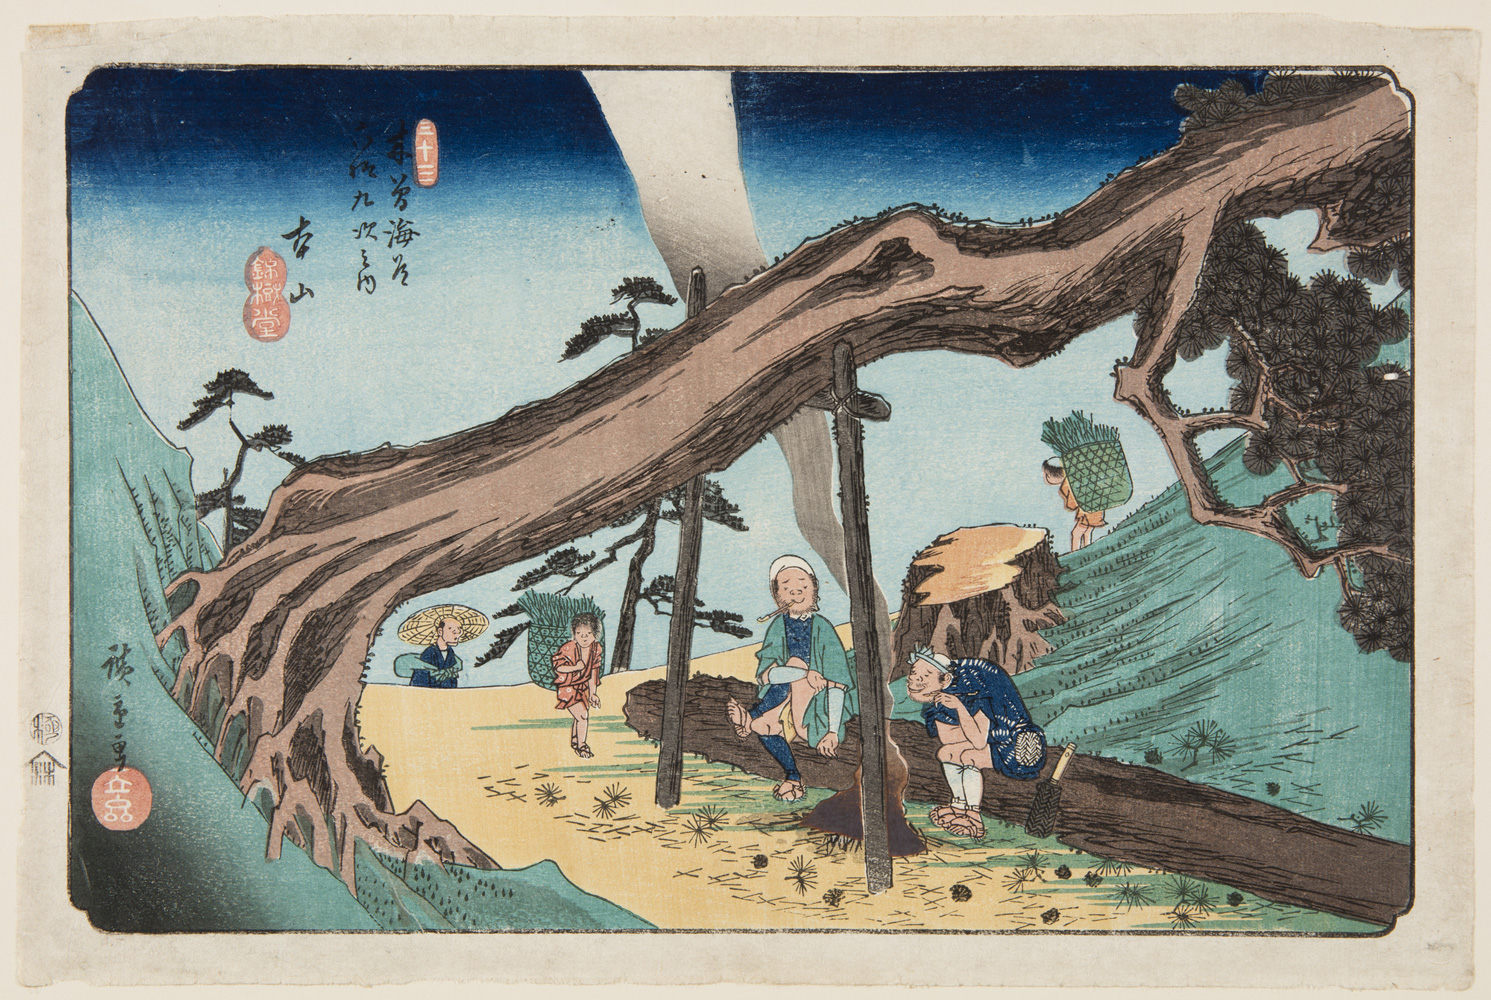 Japanese print of a mountain road. A fallen tree is held up with posts and underneath two men have made a campfire and sit on a fallen log. Three other figures walk along the road carrying large baskets on their back.